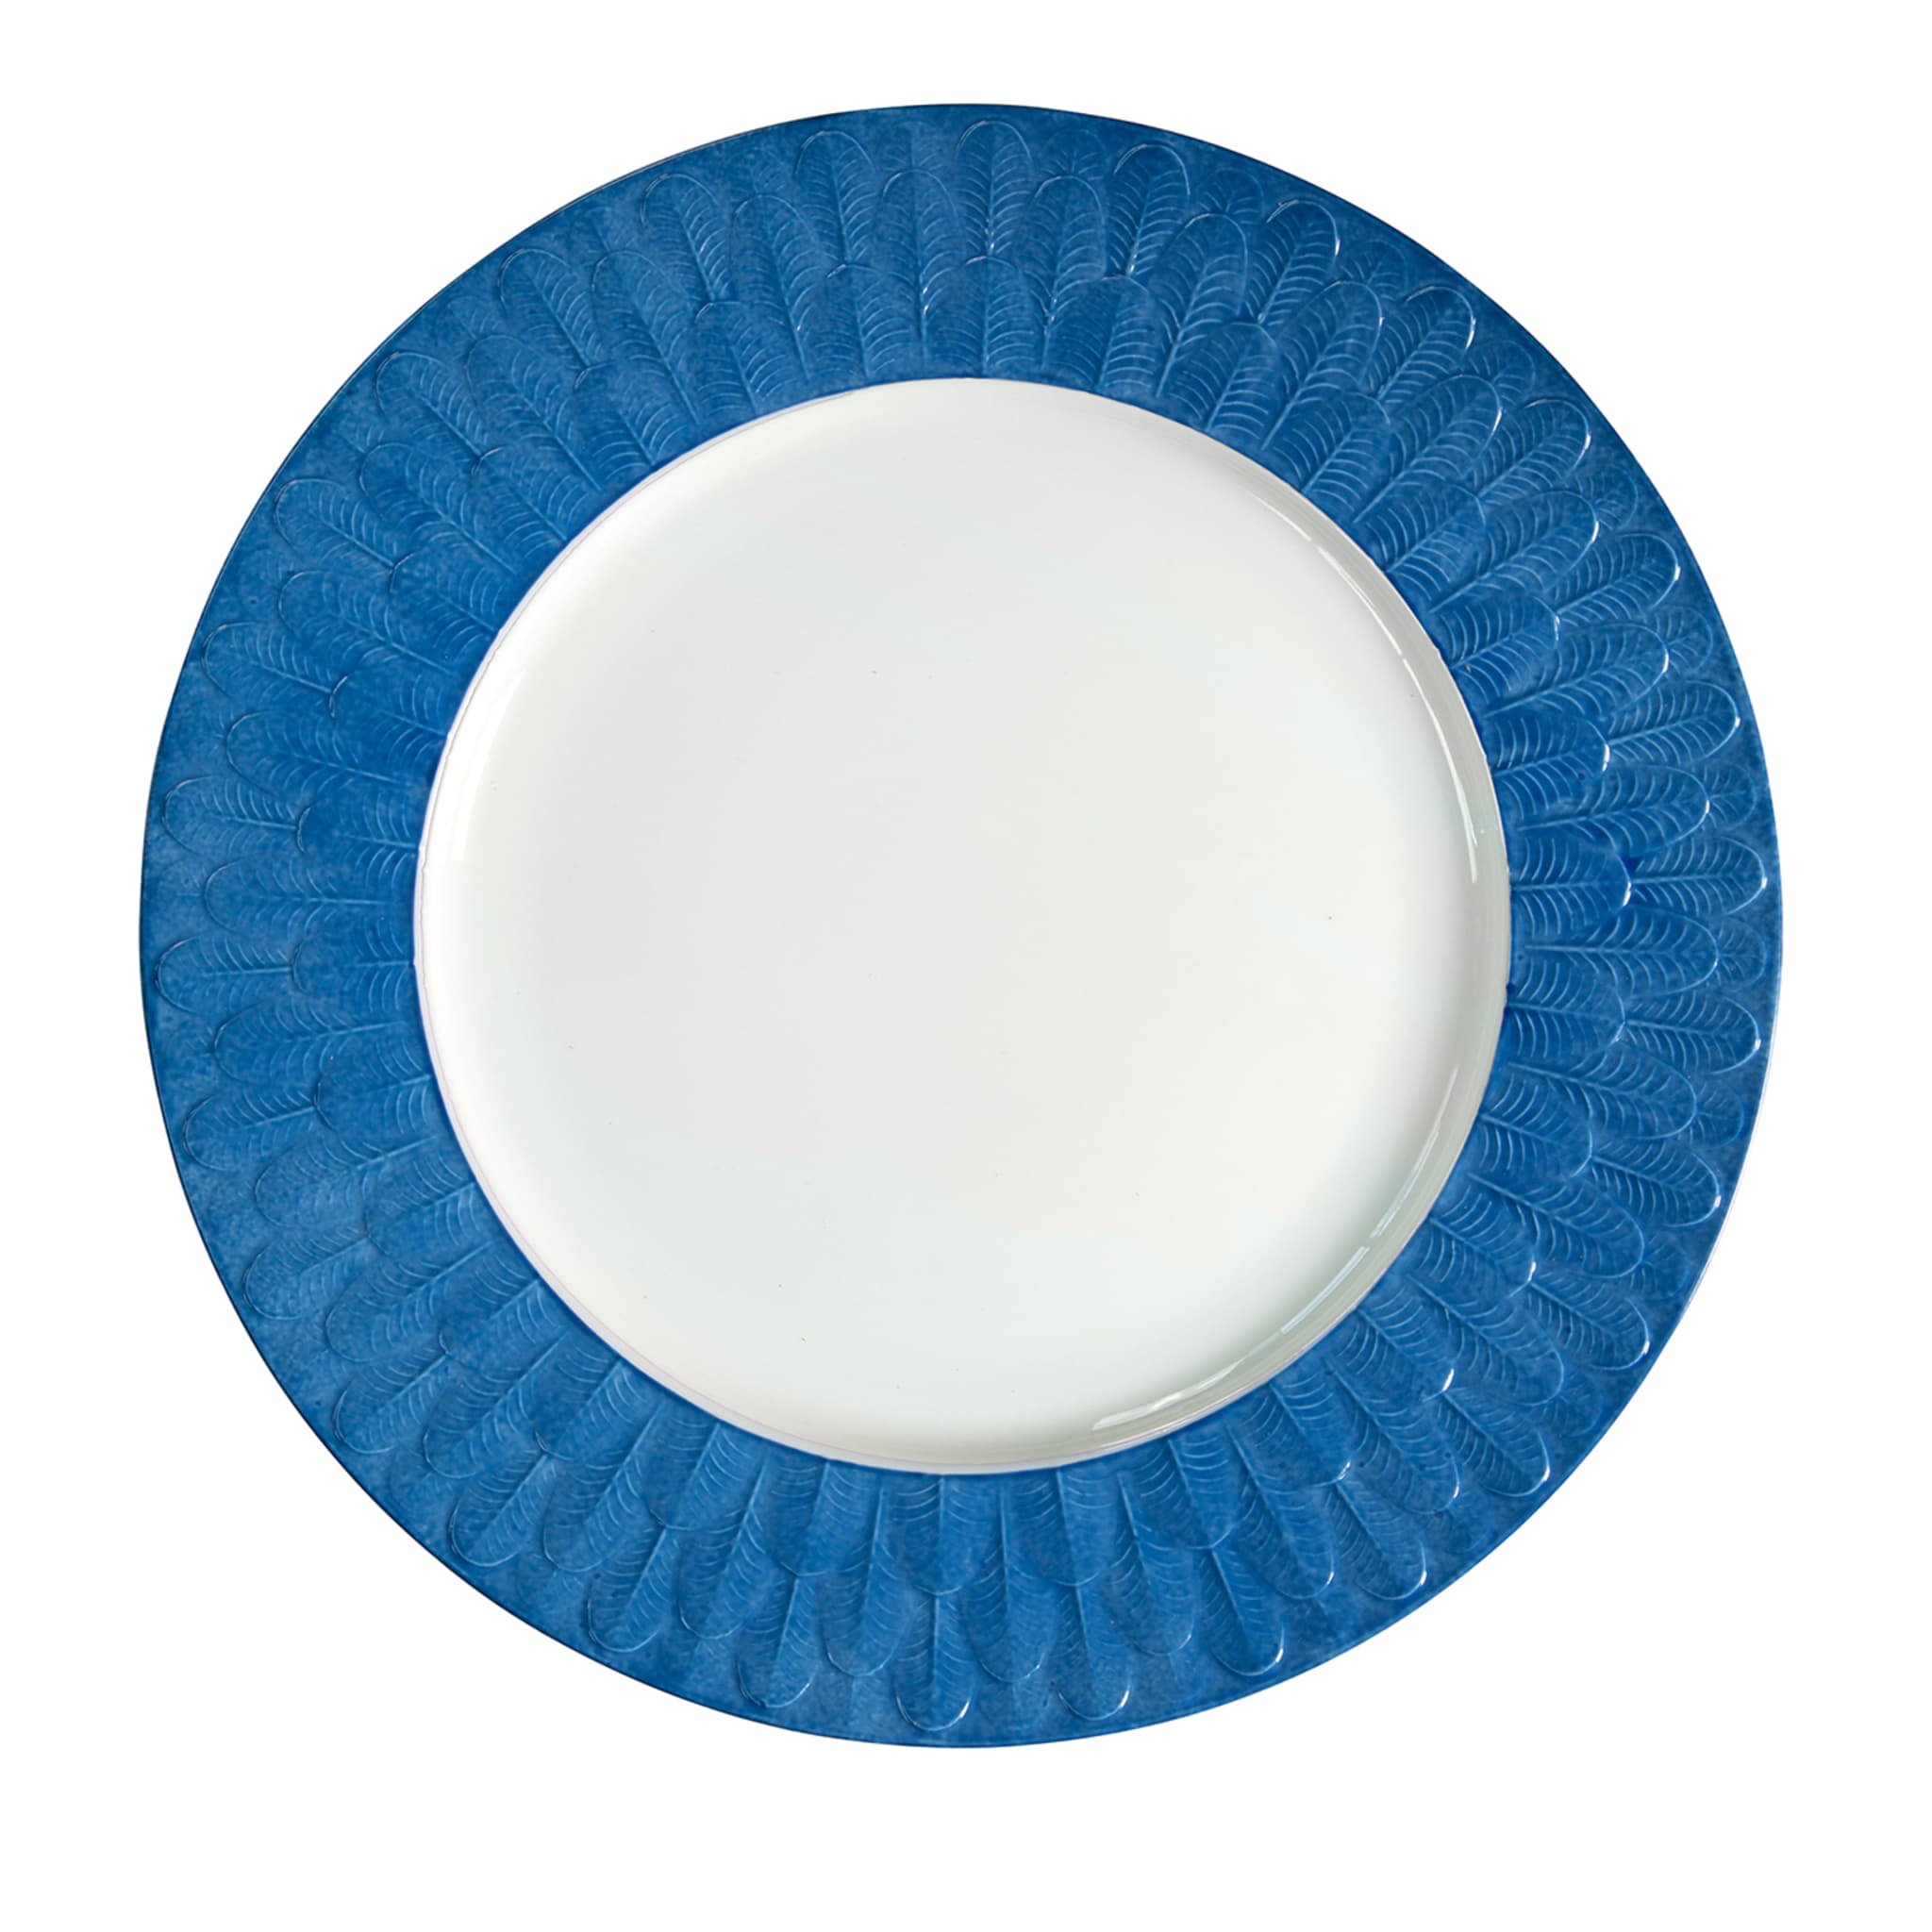 PEACOCK DINNER PLATE - BLUE - Main view